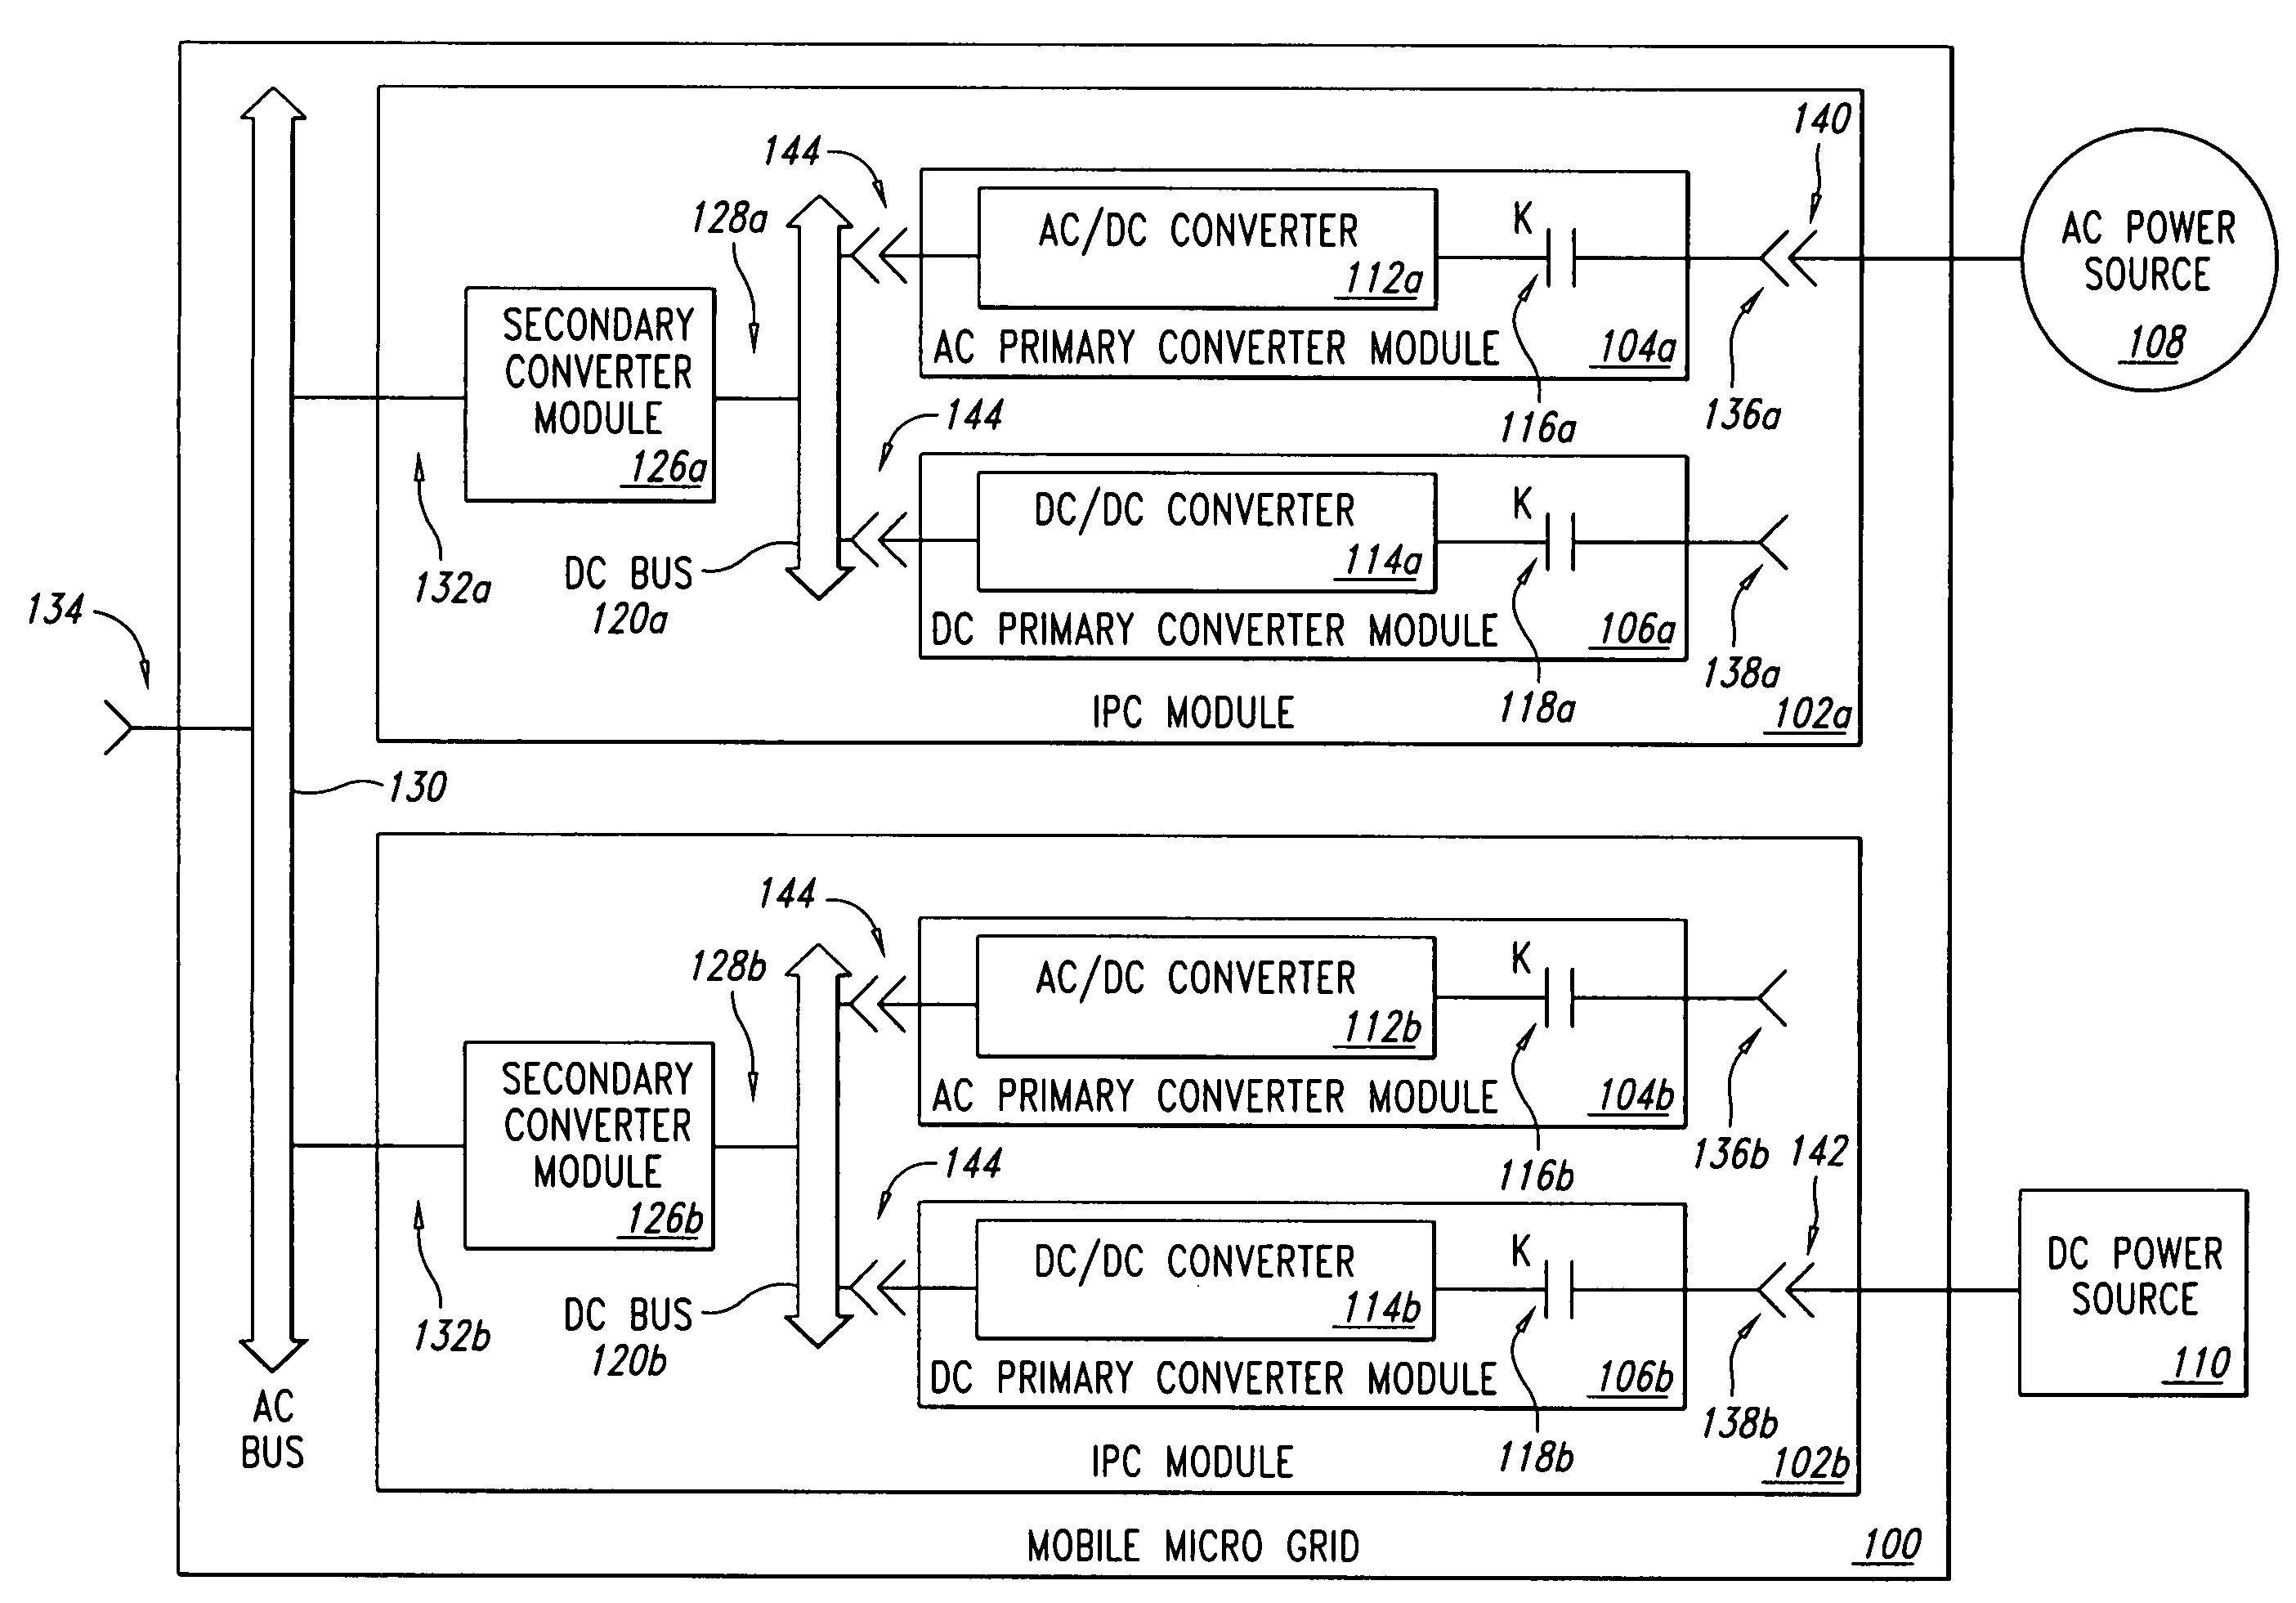 System and method for a power system micro grid